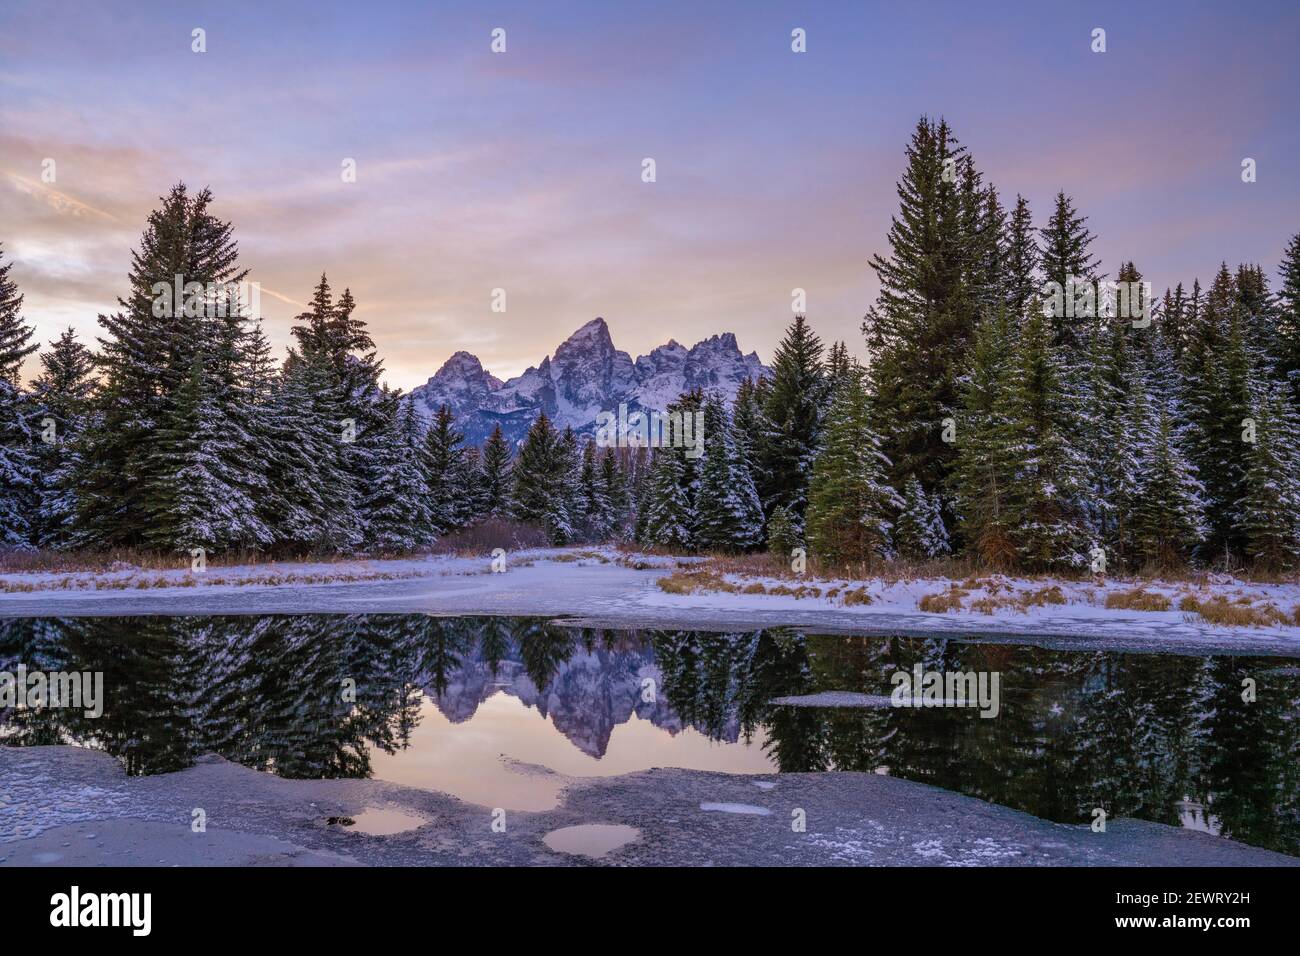 Evening light and reflection of Teton Range in snowy pond, Grand Teton National Park, Wyoming, United States of America, North America Stock Photo